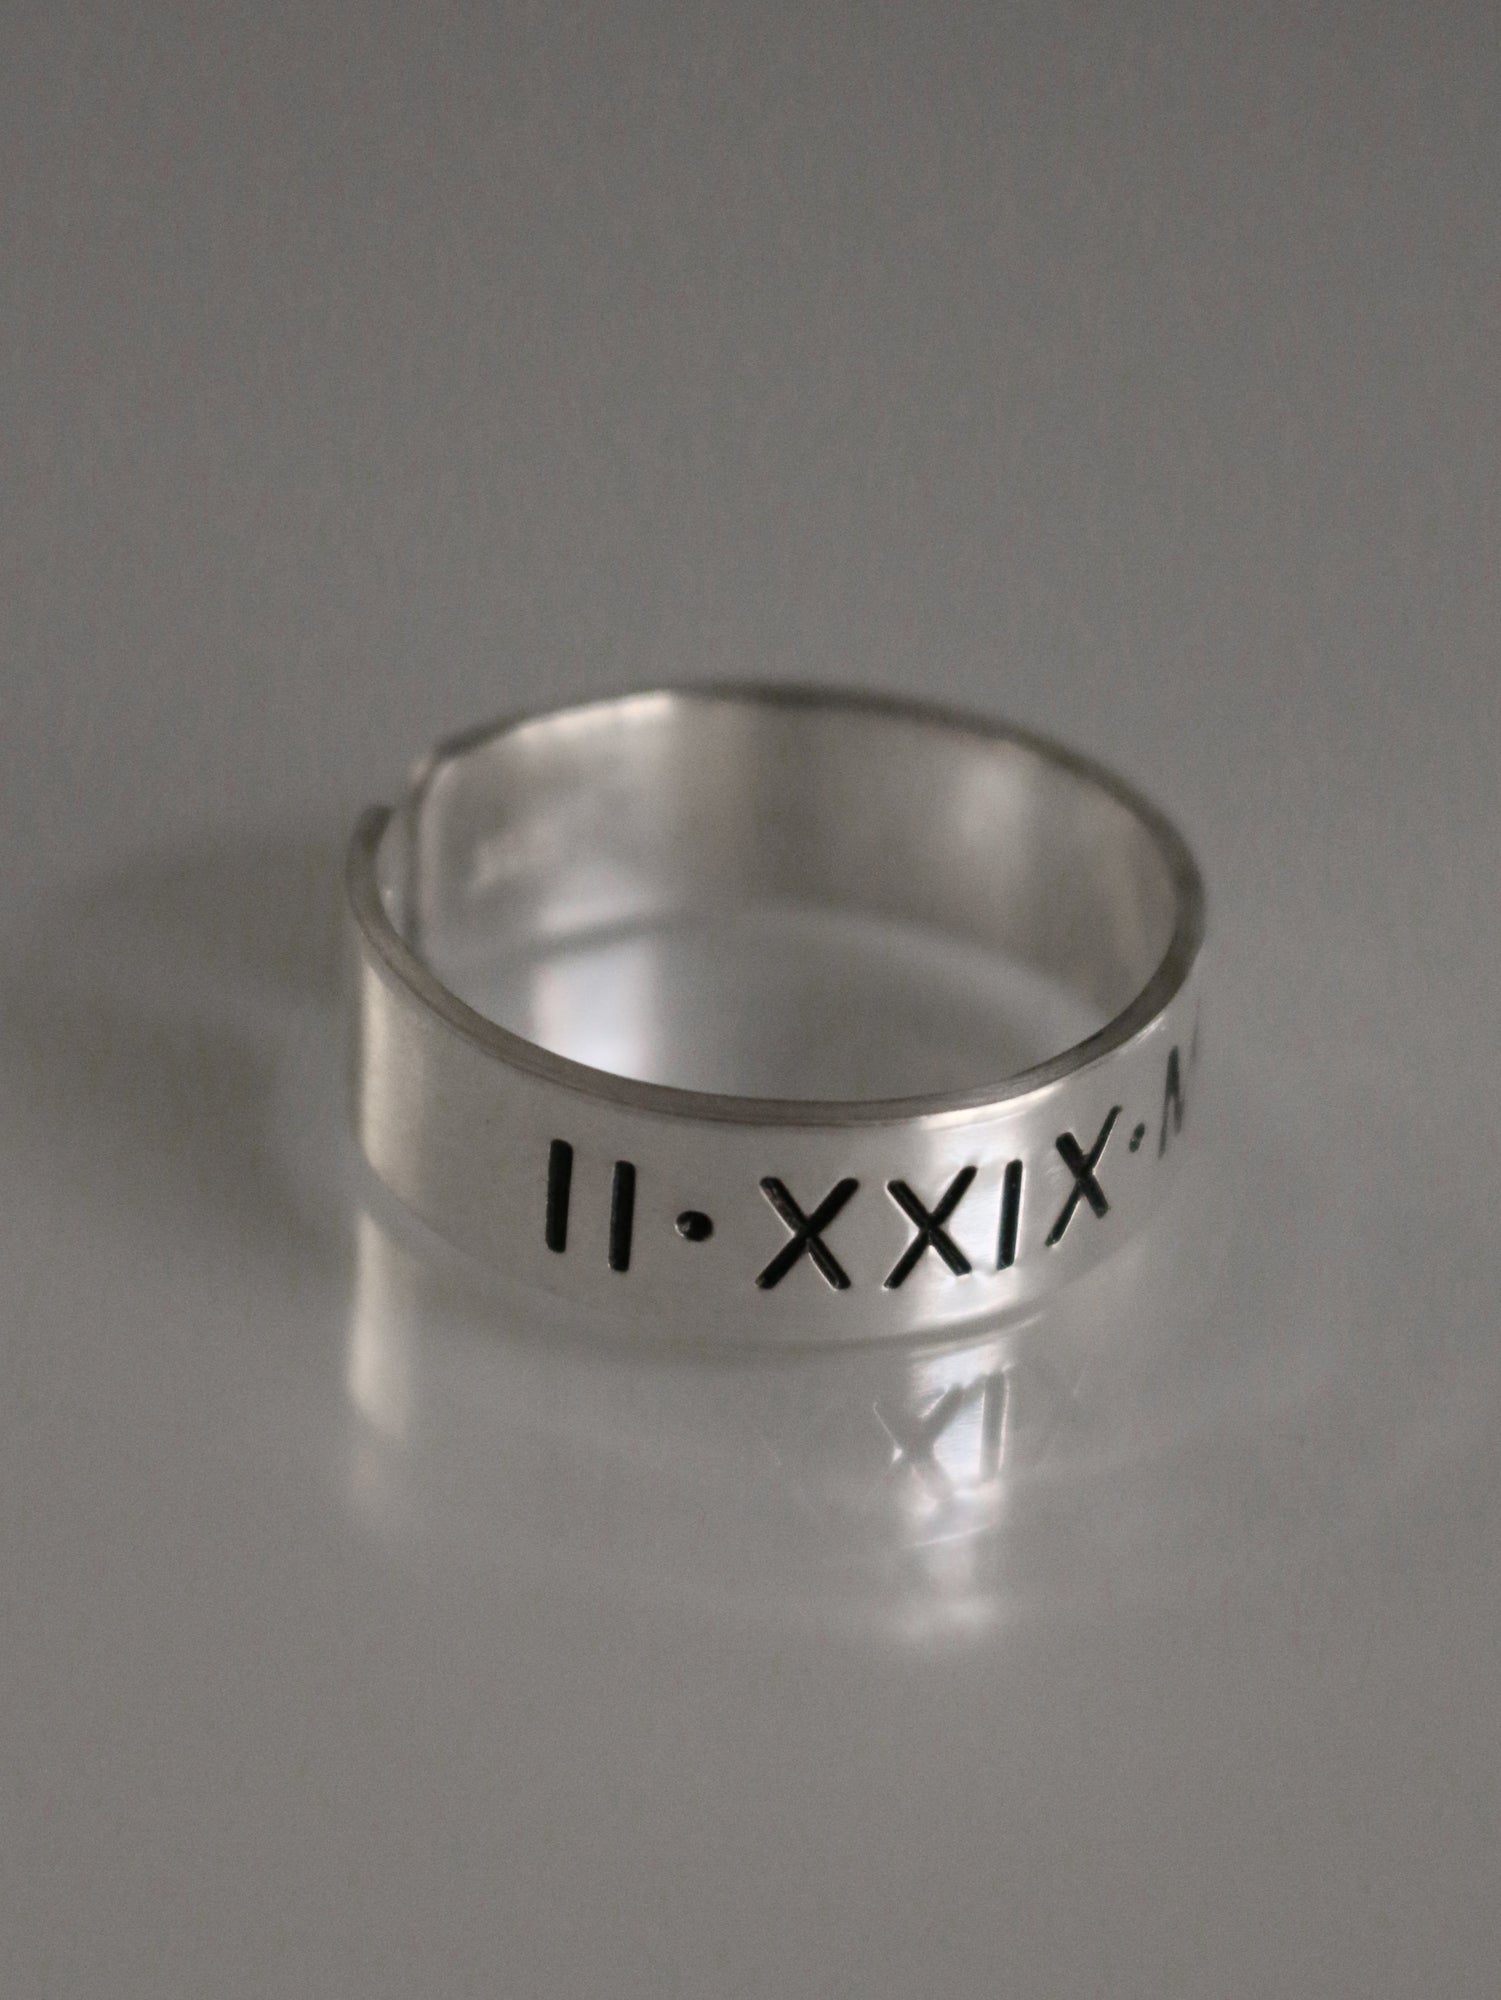 Buy Custom Date Ring, Personalized Roman Numeral Ring, Anniversary Gift,  Dainty Silver Ring, 3mm Band Ring, Silver Band Ring, Wedding Ring Online in  India - Etsy